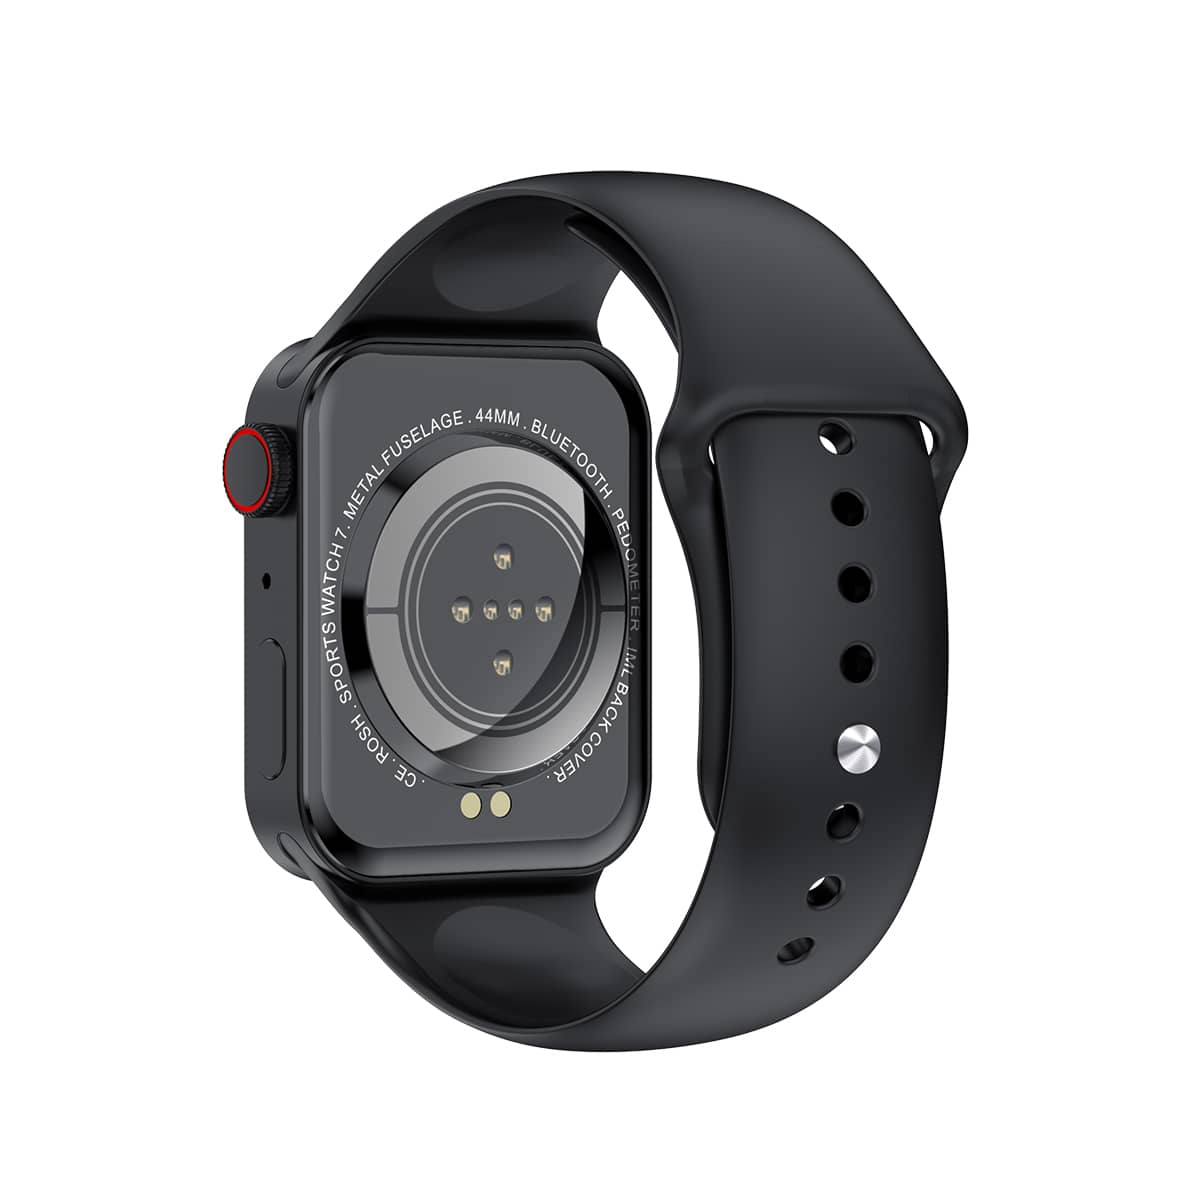 apple watch,Apple Watch se,apple watch series 7,galaxy watch 4,iwatch,new Apple Watch,samsung watch,smart I watch,watch series,watches,watches for men,amazfit bip s,android smartwatch,android watch,fitbit ionic,samsung watch 4,best smartwatch,smartwatches